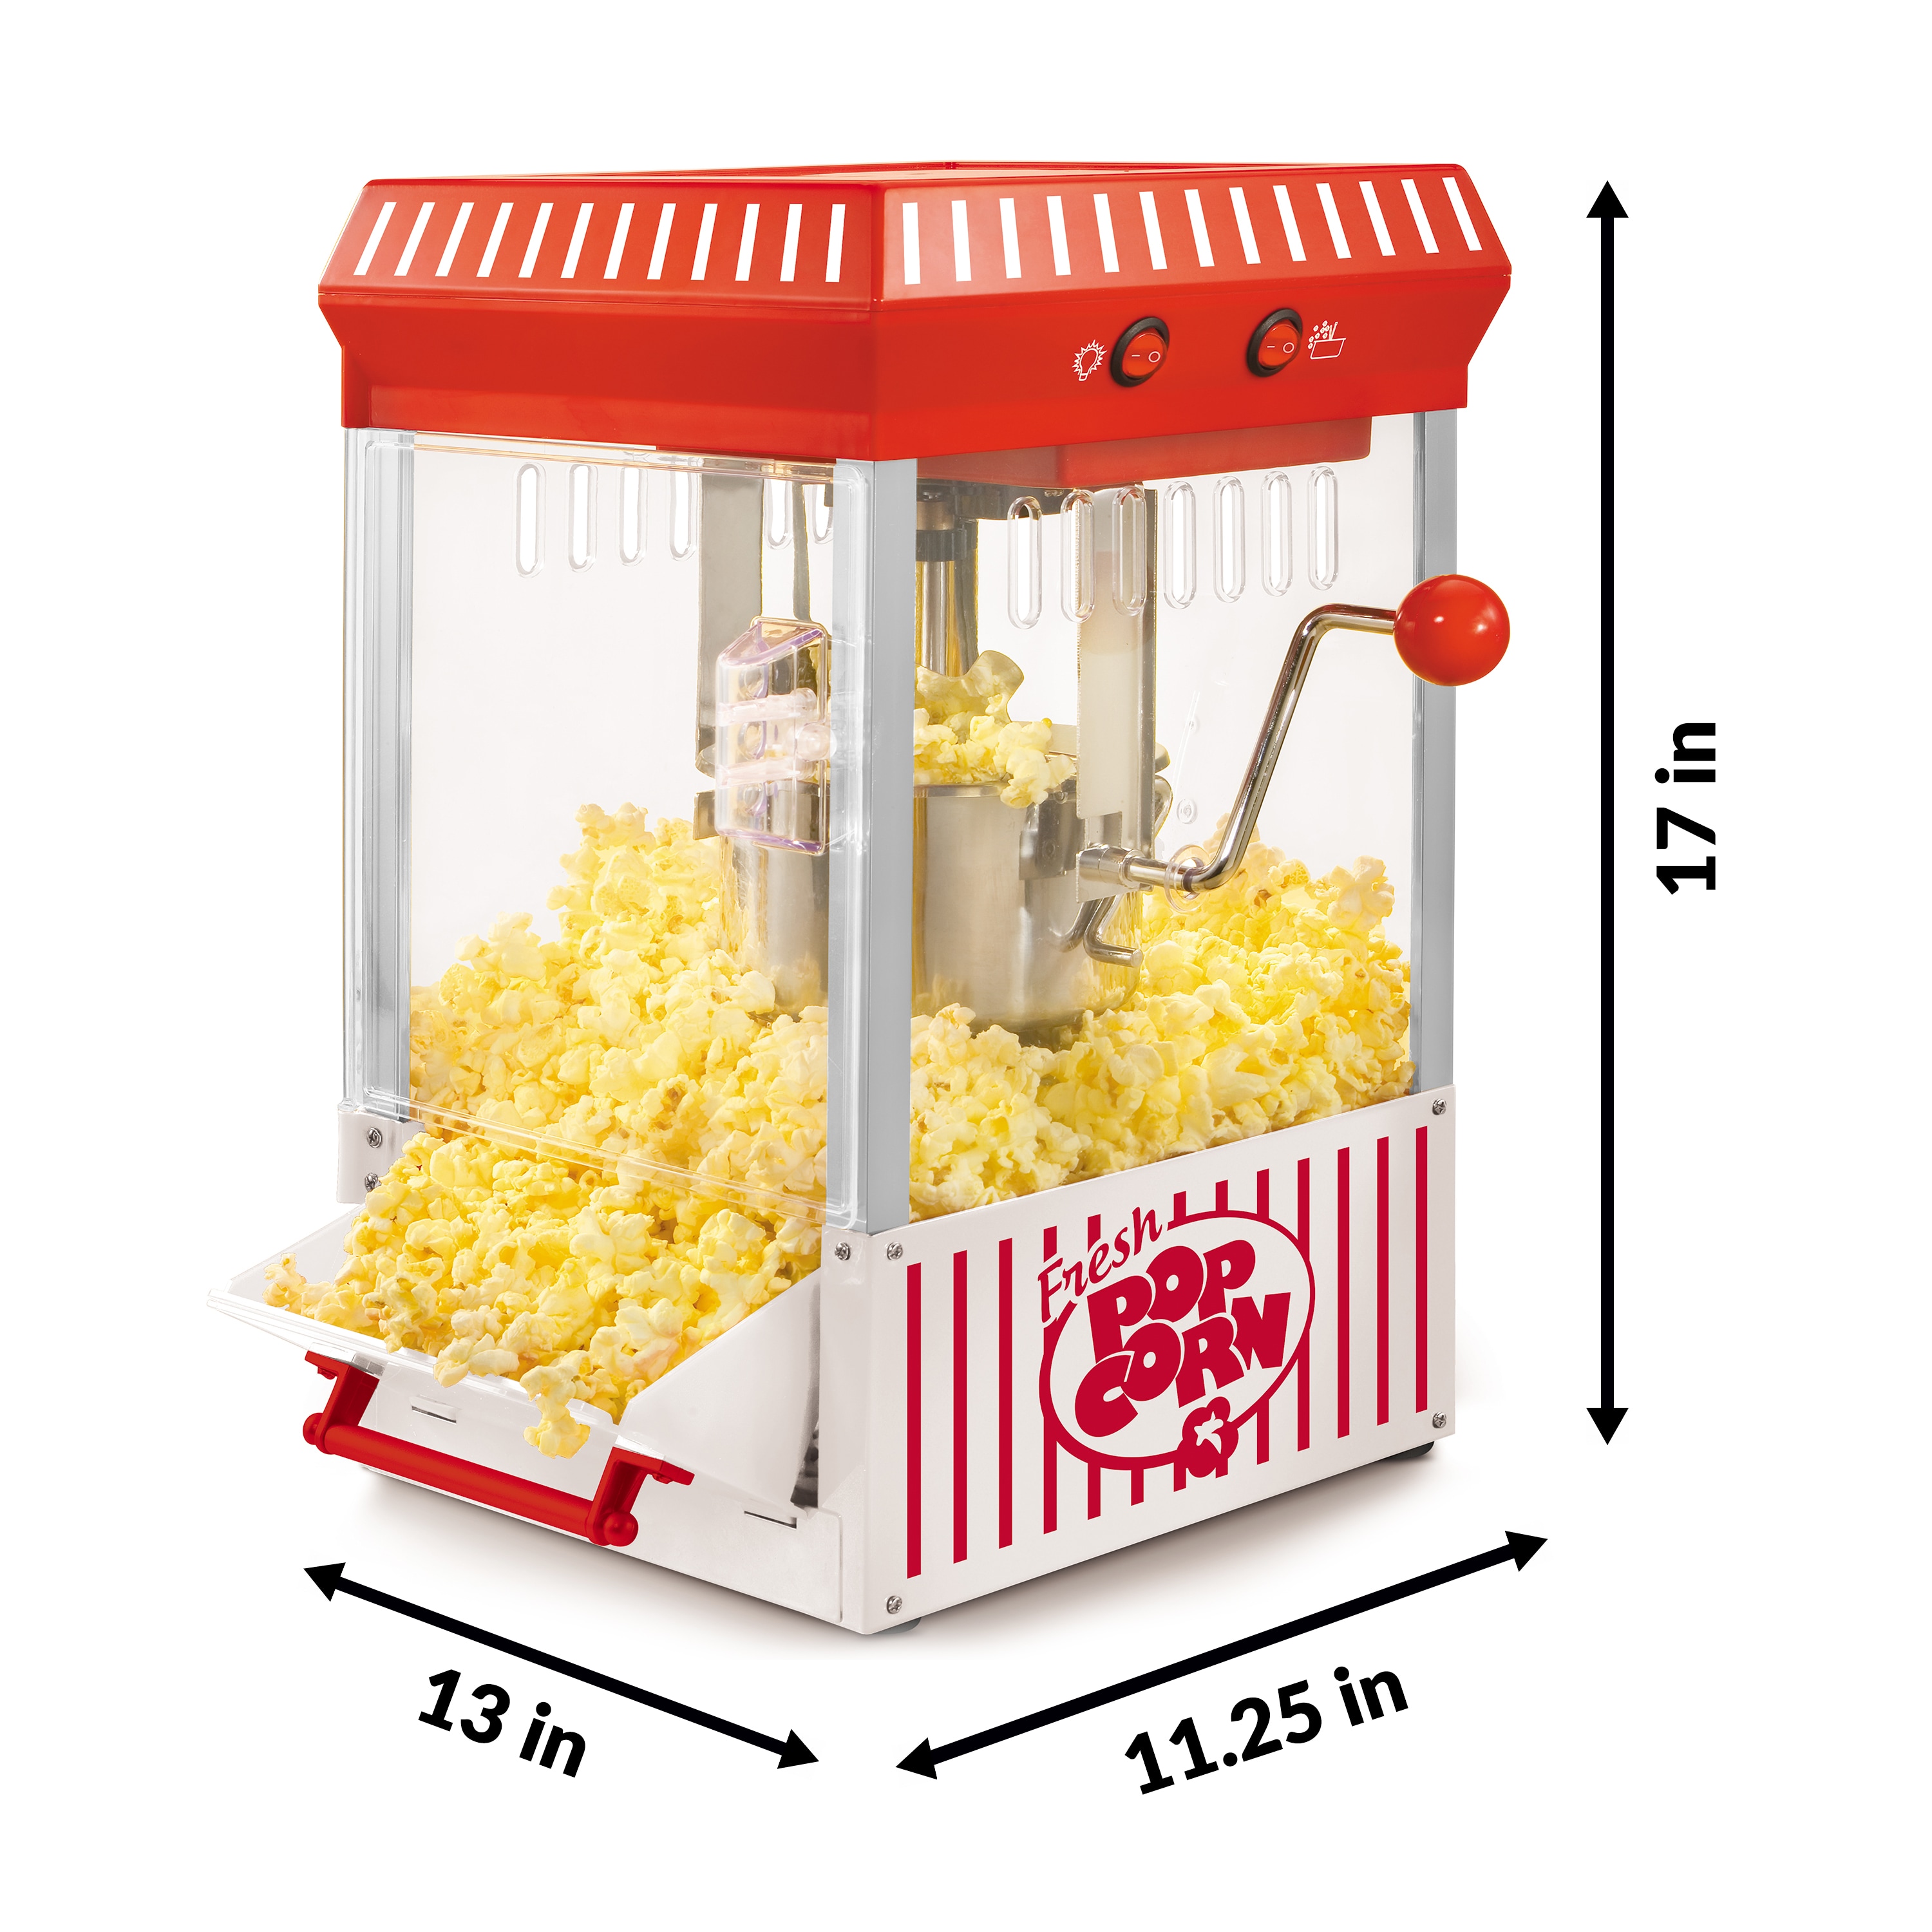 Discontinued Cuisinart Classic-Style Popcorn Maker